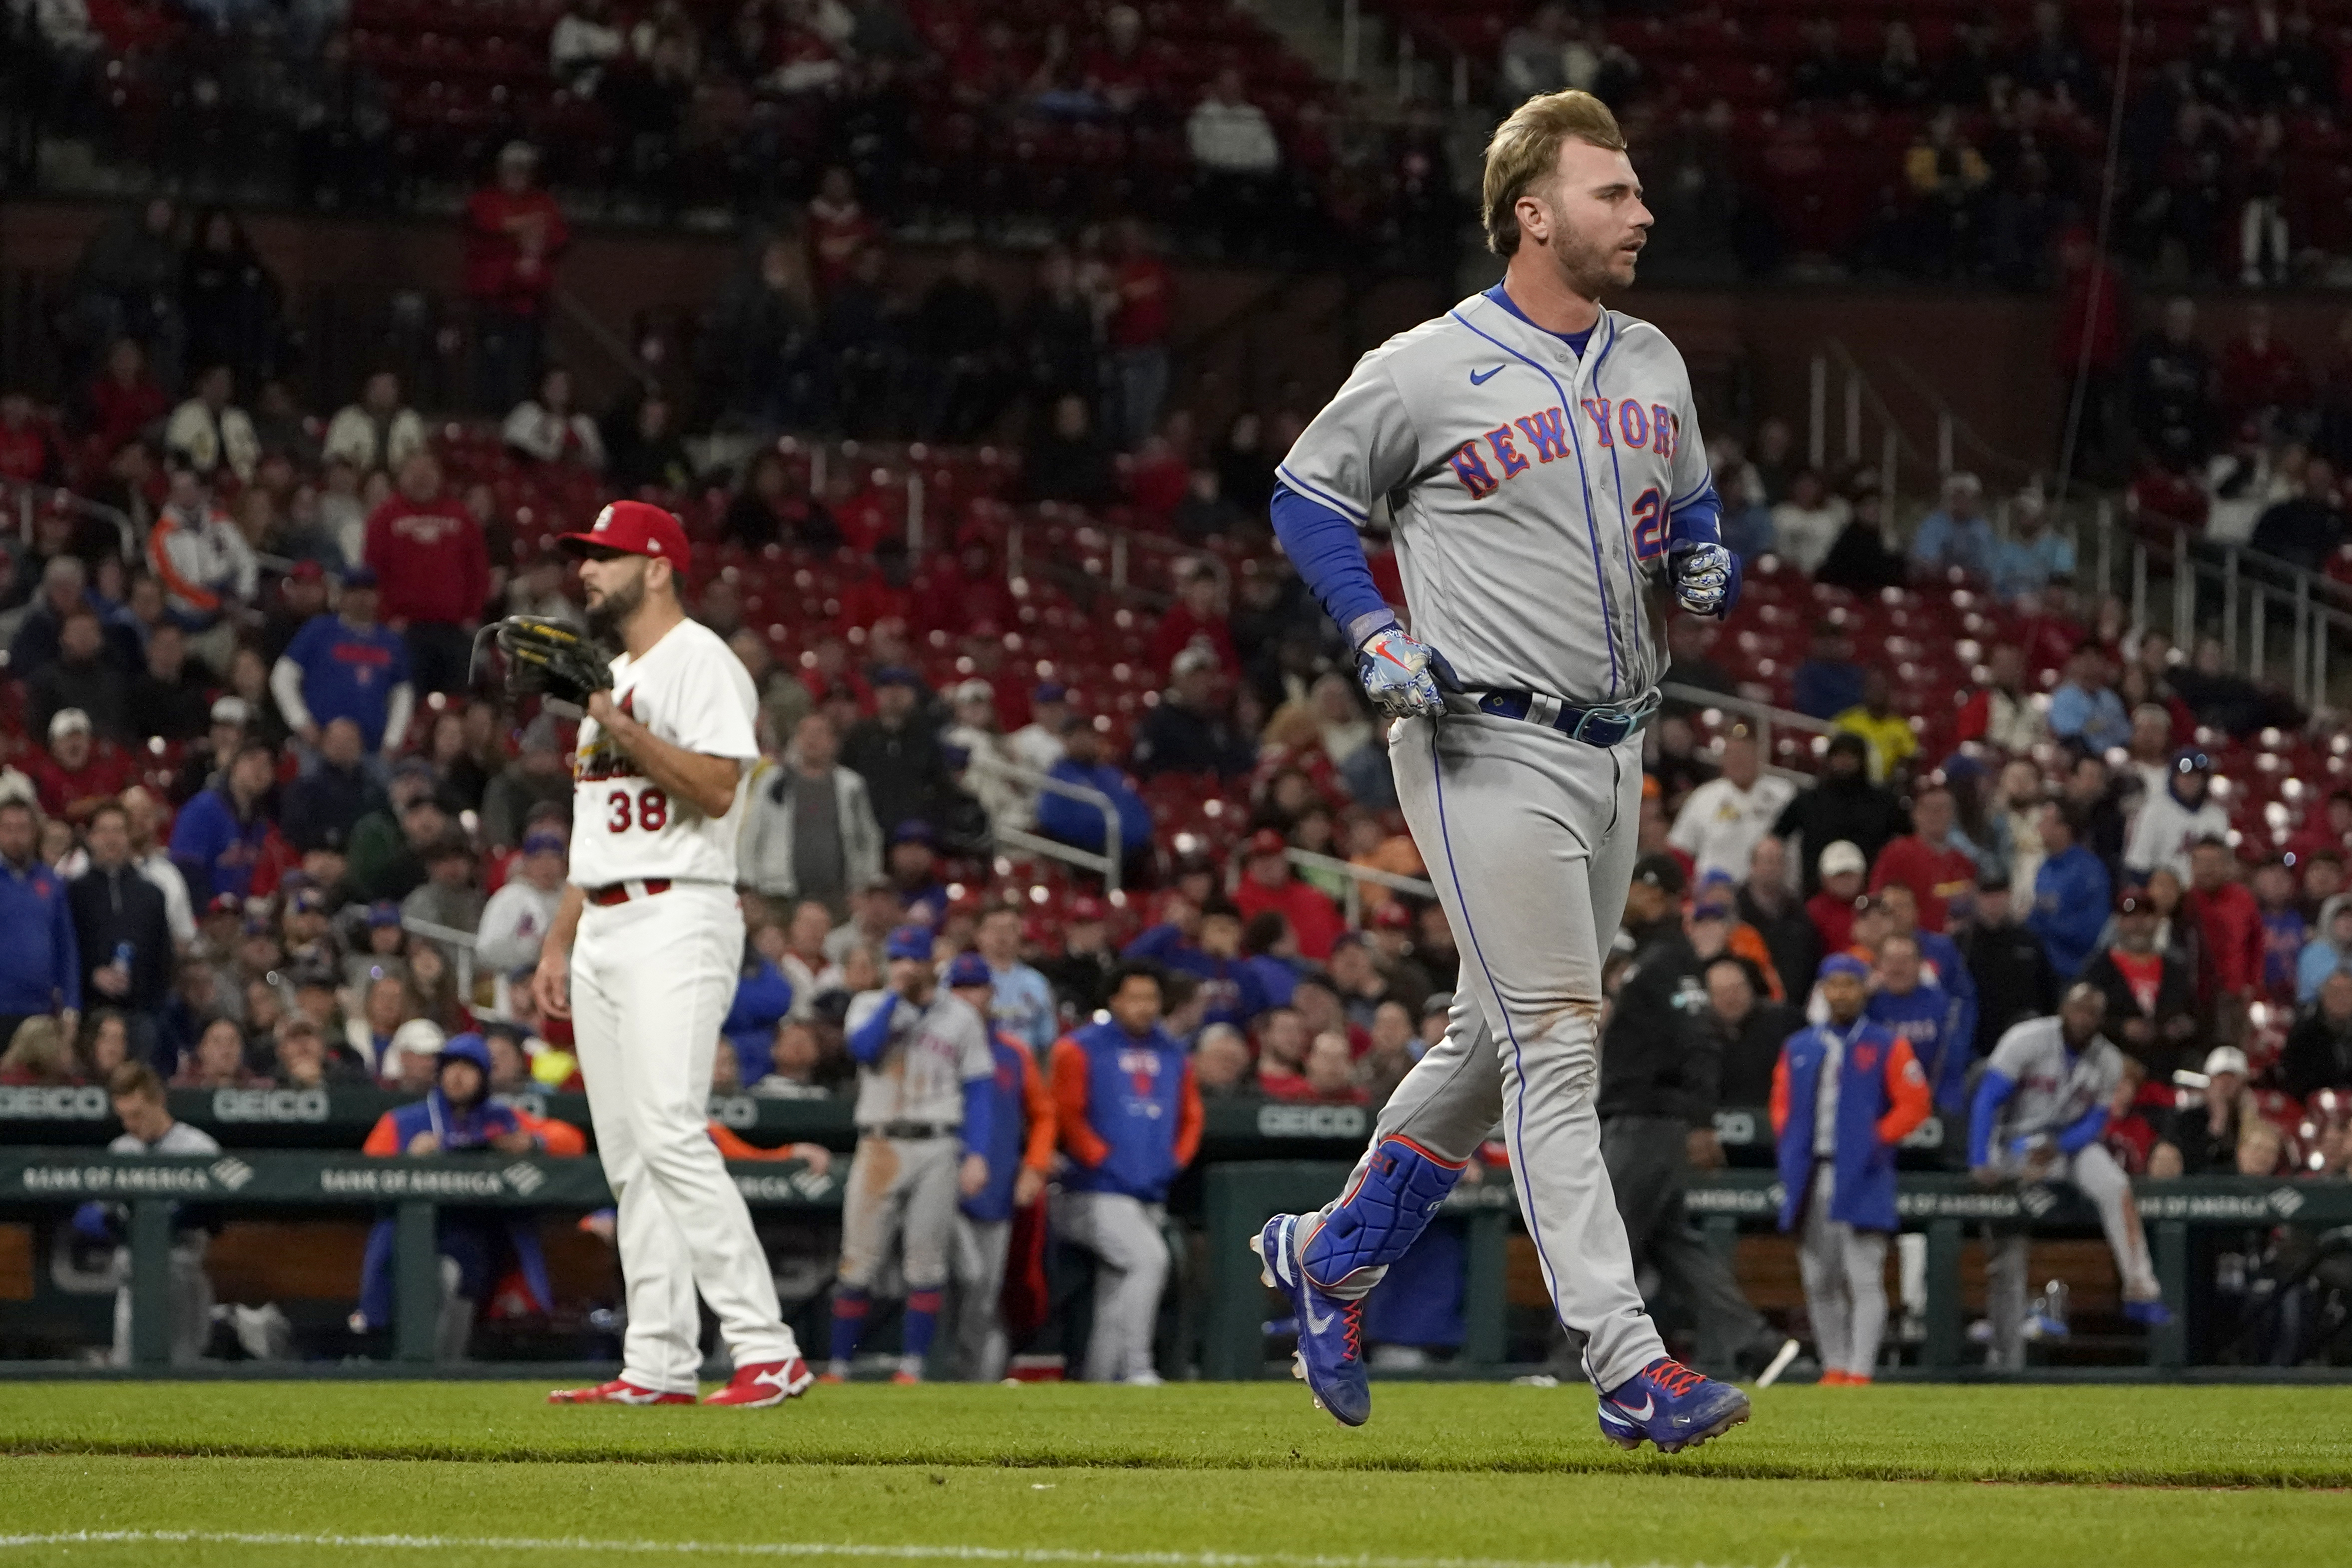 Pete Alonso on benches clearing, 04/27/2022